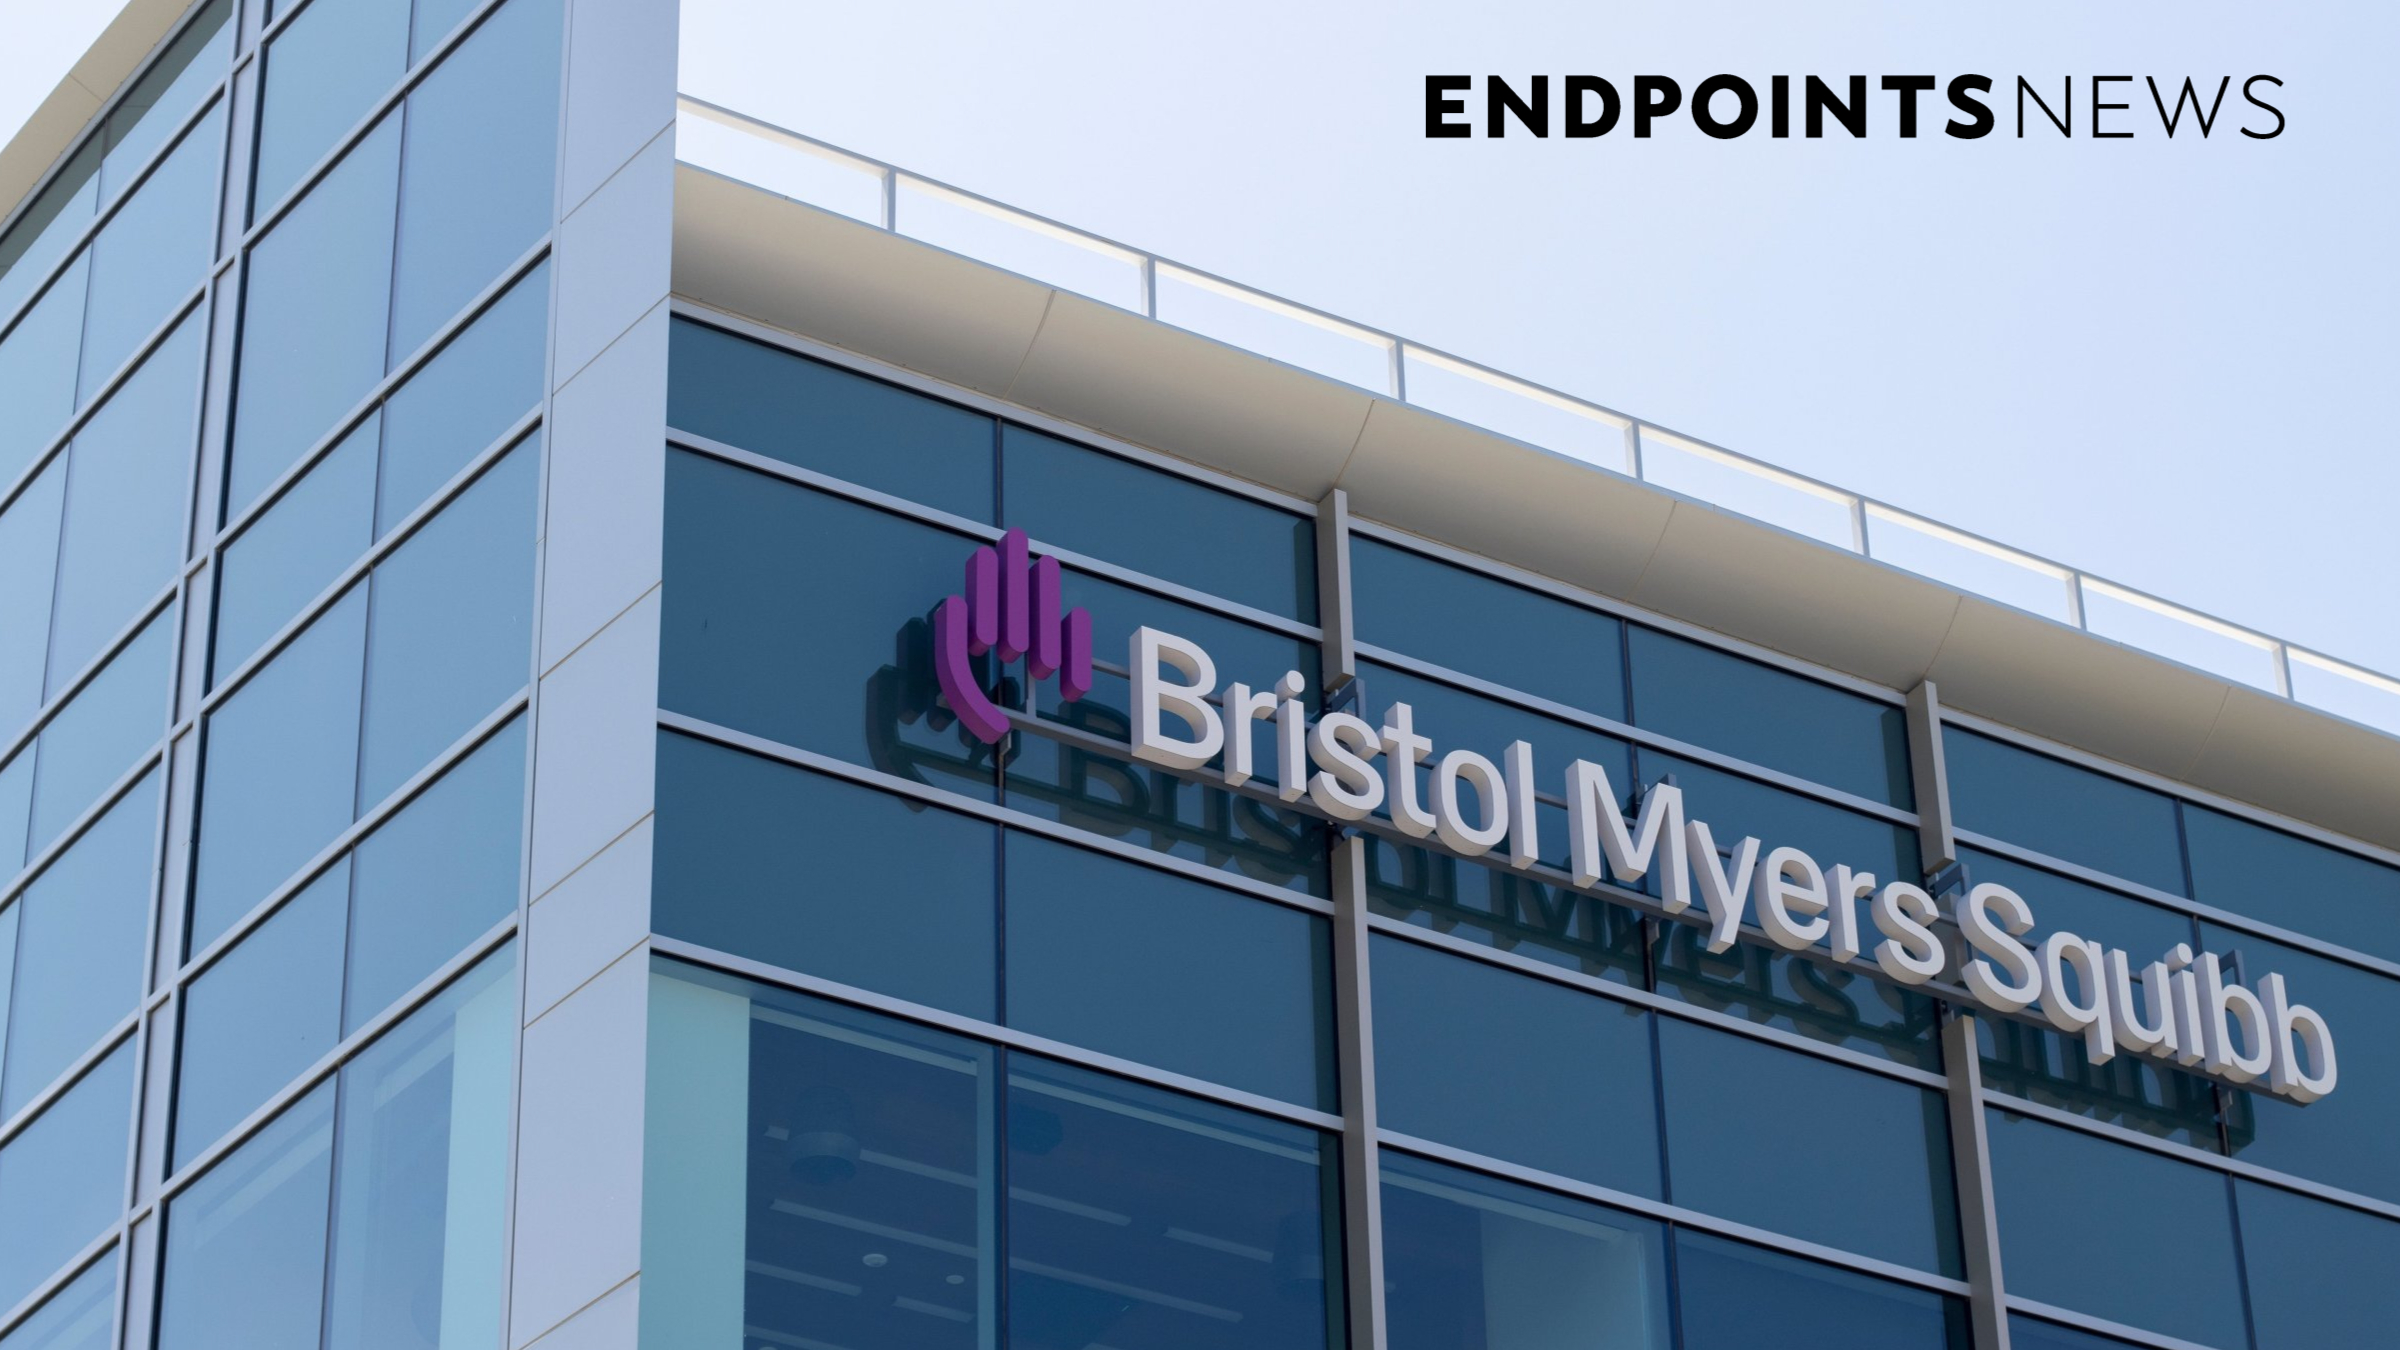 Bristol Myers details PhIII win in first-line test of Reblozyl for reducing transfusions in early blood cancer patients